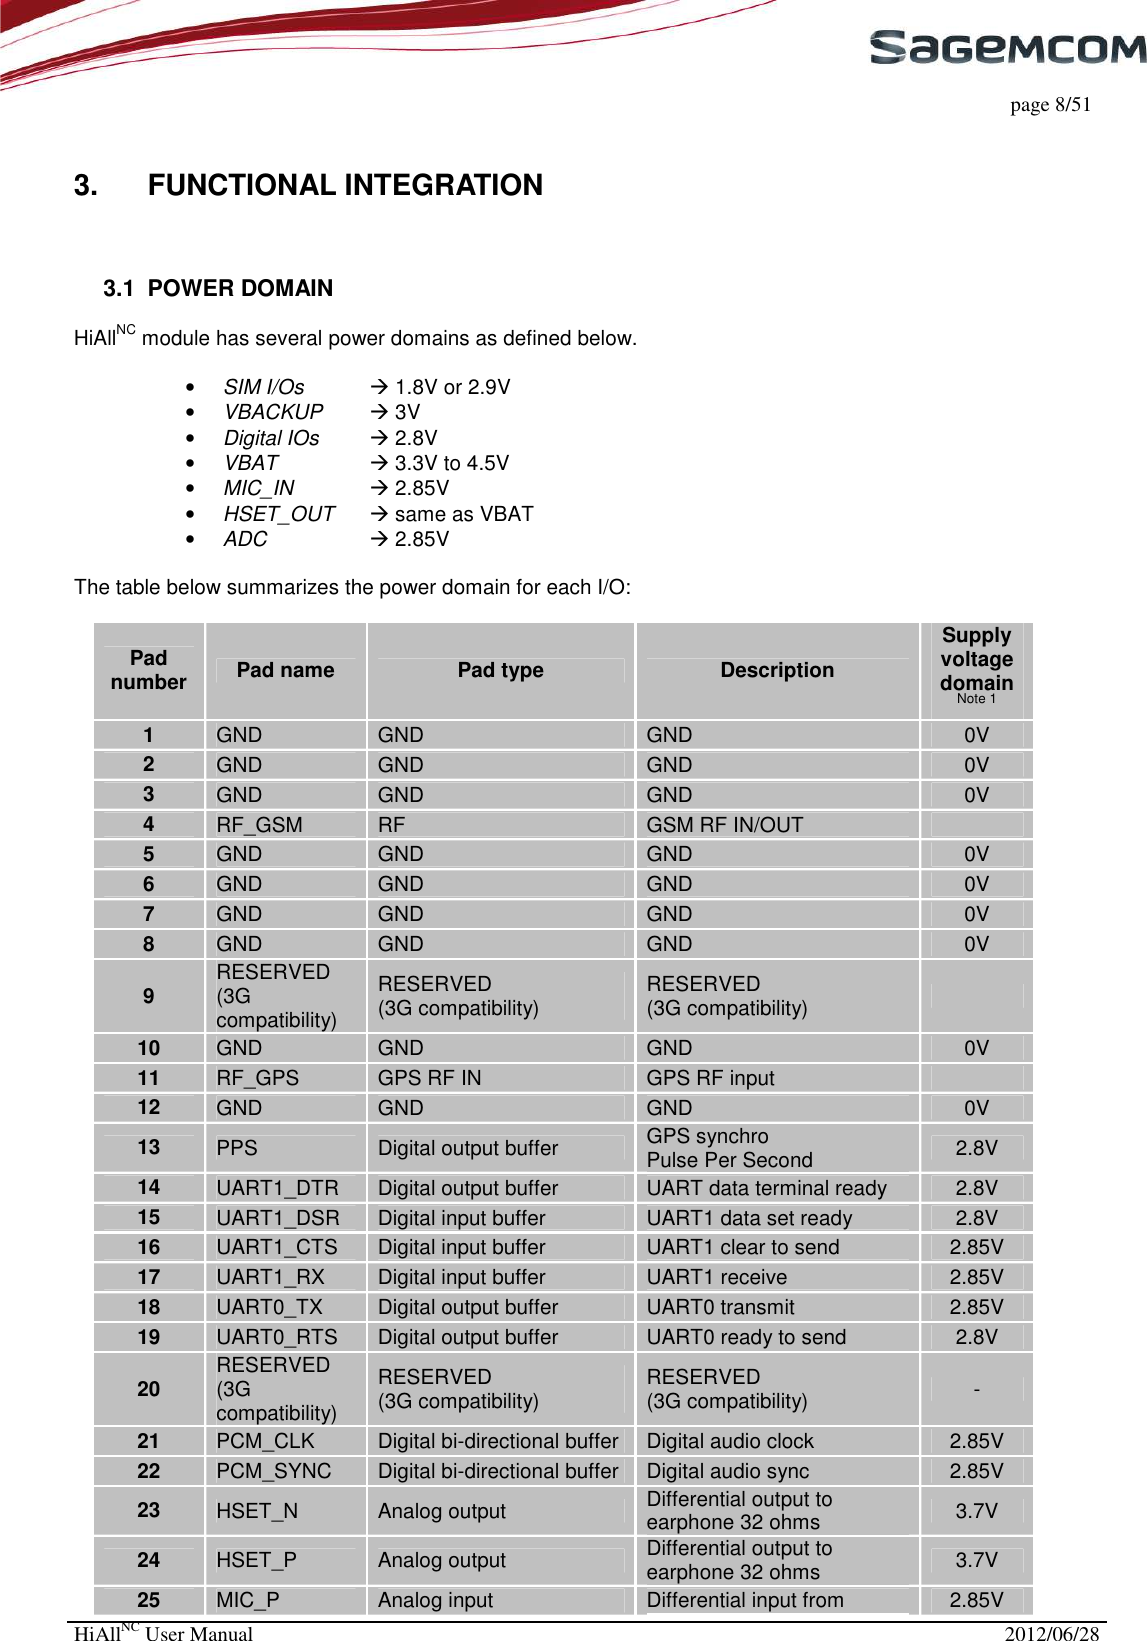     page 8/51 HiAllNC User Manual  2012/06/28  3.  FUNCTIONAL INTEGRATION  3.1  POWER DOMAIN HiAllNC module has several power domains as defined below.  • SIM I/Os  1.8V or 2.9V • VBACKUP  3V • Digital IOs  2.8V • VBAT     3.3V to 4.5V • MIC_IN   2.85V • HSET_OUT   same as VBAT • ADC     2.85V  The table below summarizes the power domain for each I/O:  Pad number  Pad name  Pad type  Description Supply voltage domain Note 1 1  GND GND  GND  0V 2  GND GND  GND  0V 3  GND GND  GND  0V 4  RF_GSM RF  GSM RF IN/OUT    5  GND GND  GND  0V 6  GND GND  GND  0V 7  GND GND  GND  0V 8  GND GND  GND  0V 9  RESERVED (3G compatibility) RESERVED (3G compatibility)  RESERVED (3G compatibility)    10  GND GND  GND  0V 11  RF_GPS GPS RF IN  GPS RF input    12  GND GND  GND  0V 13  PPS Digital output buffer  GPS synchro Pulse Per Second  2.8V 14  UART1_DTR Digital output buffer  UART data terminal ready   2.8V 15  UART1_DSR Digital input buffer  UART1 data set ready  2.8V 16  UART1_CTS Digital input buffer   UART1 clear to send  2.85V 17  UART1_RX Digital input buffer   UART1 receive  2.85V 18  UART0_TX Digital output buffer  UART0 transmit  2.85V 19  UART0_RTS Digital output buffer  UART0 ready to send  2.8V 20  RESERVED (3G compatibility) RESERVED (3G compatibility)  RESERVED (3G compatibility)  - 21  PCM_CLK Digital bi-directional buffer  Digital audio clock  2.85V 22  PCM_SYNC Digital bi-directional buffer  Digital audio sync  2.85V 23  HSET_N Analog output  Differential output to earphone 32 ohms  3.7V 24  HSET_P Analog output  Differential output to earphone 32 ohms  3.7V 25  MIC_P Analog input  Differential input from  2.85V 